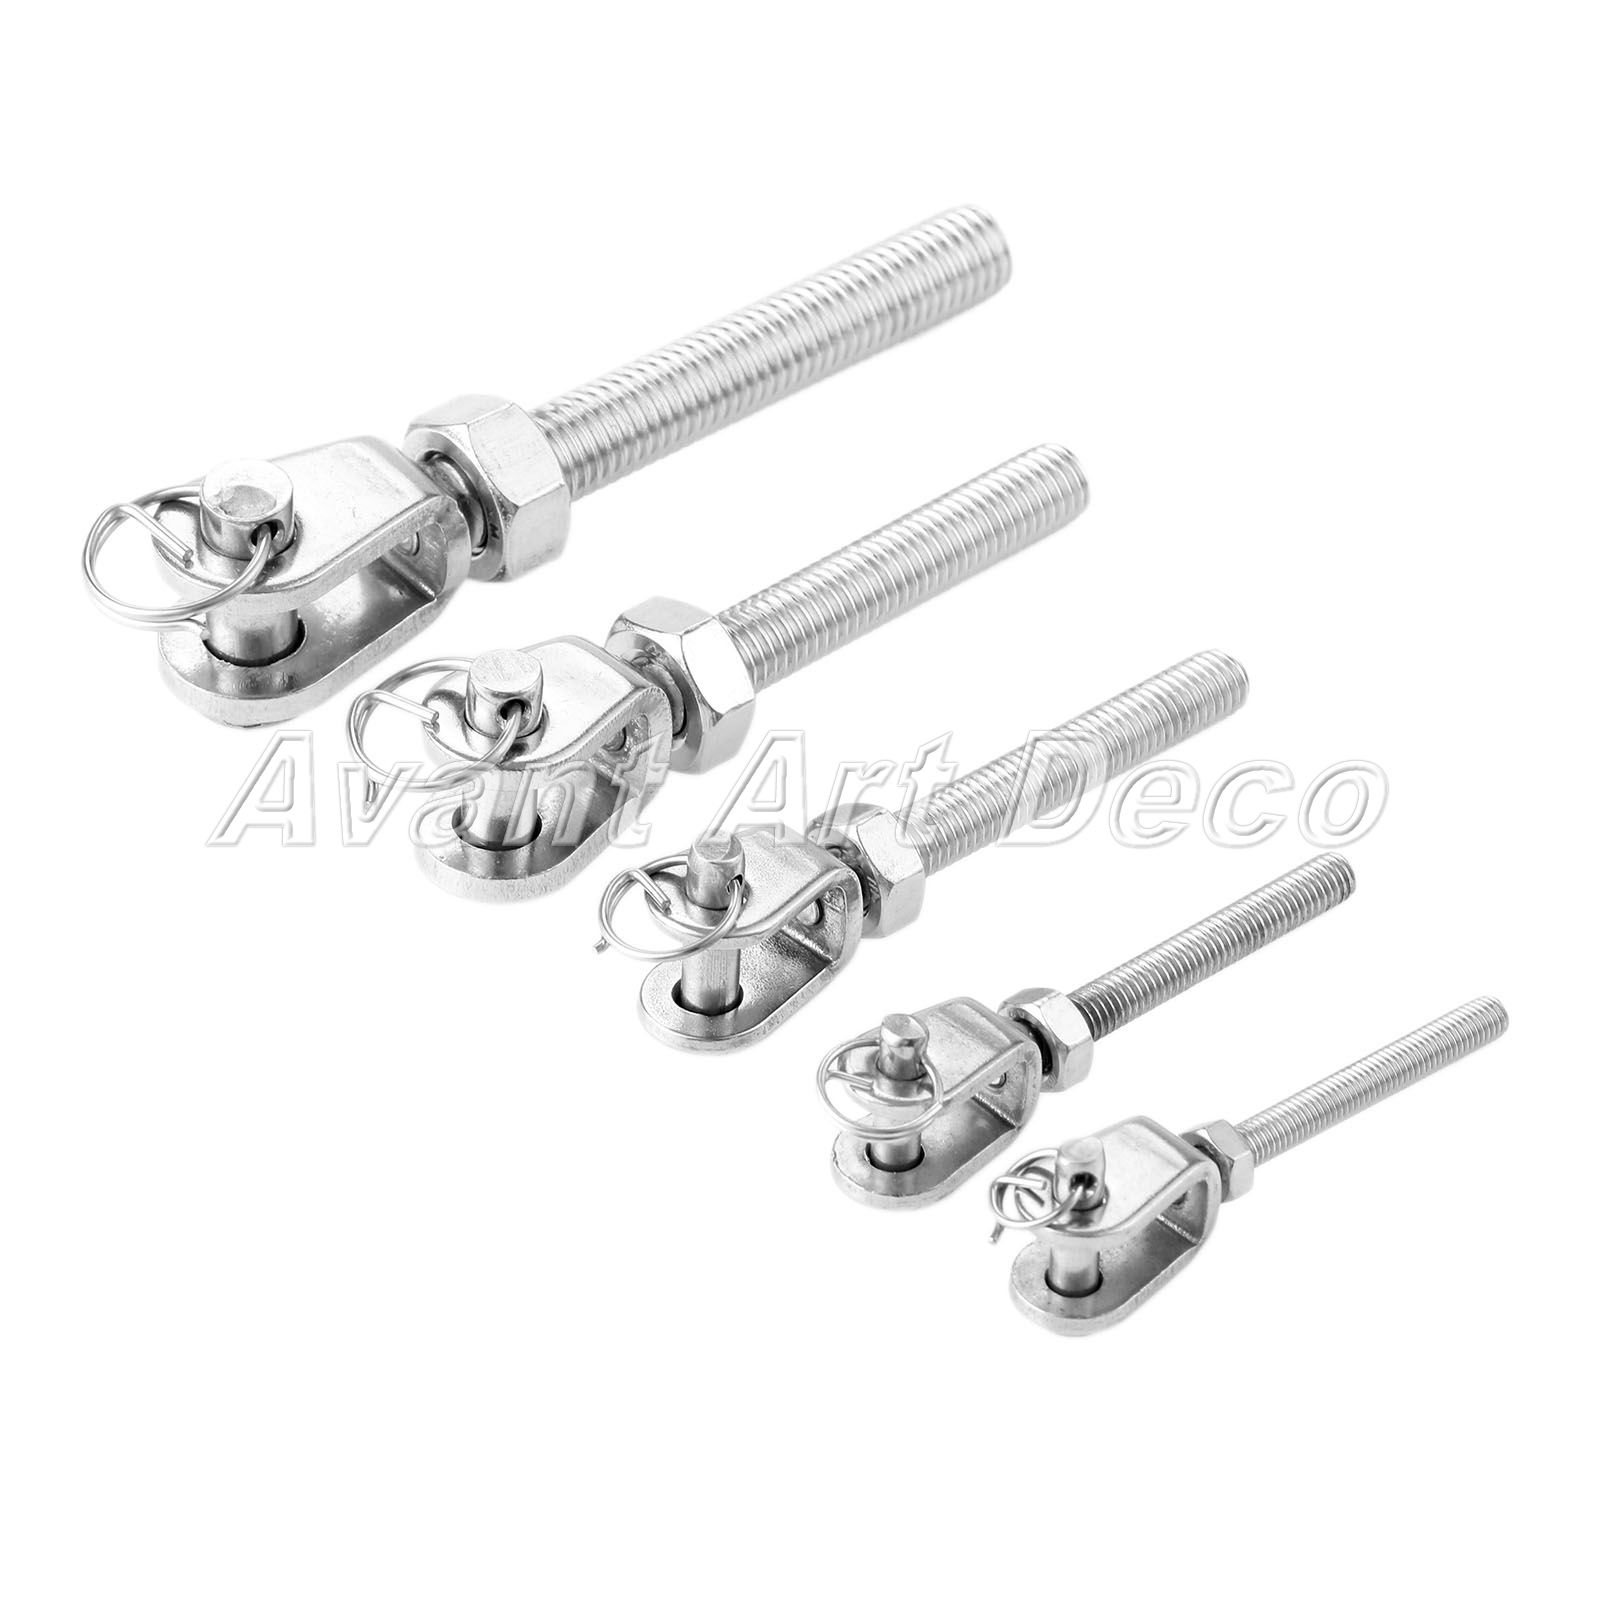 Stainless Steel Jaw Open Bolt & Nut Turnbuckle Parts for Shade Sail Boat Rigging 